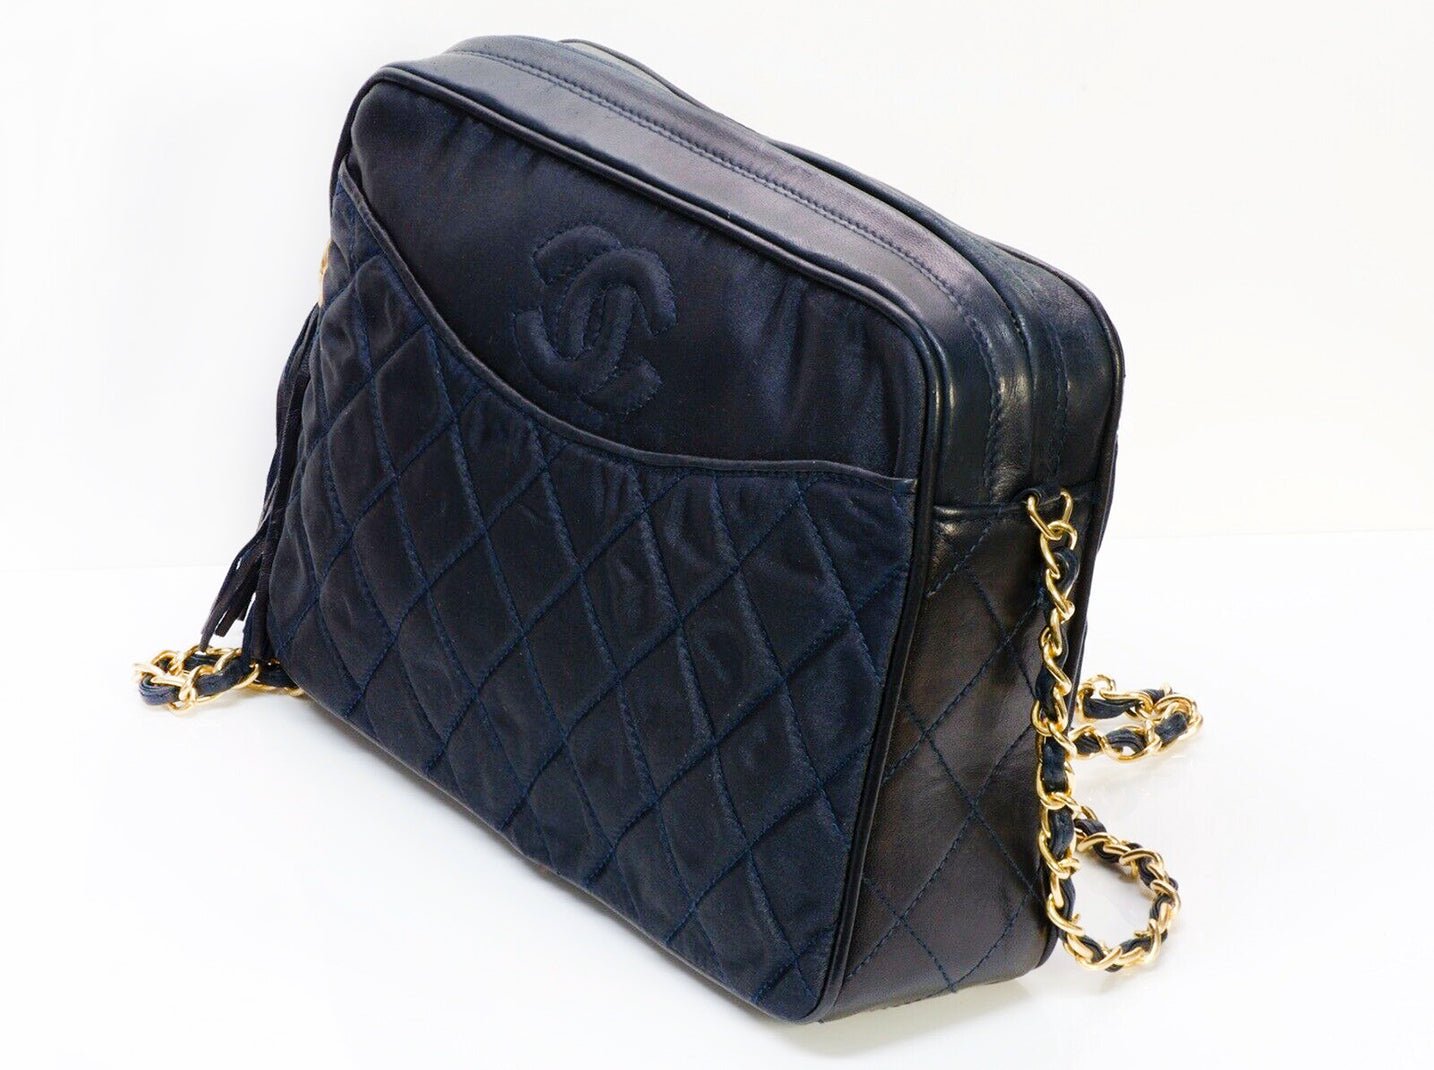 Vintage CHANEL CC Navy Blue Nylon Quilted Leather Crossbody Bag